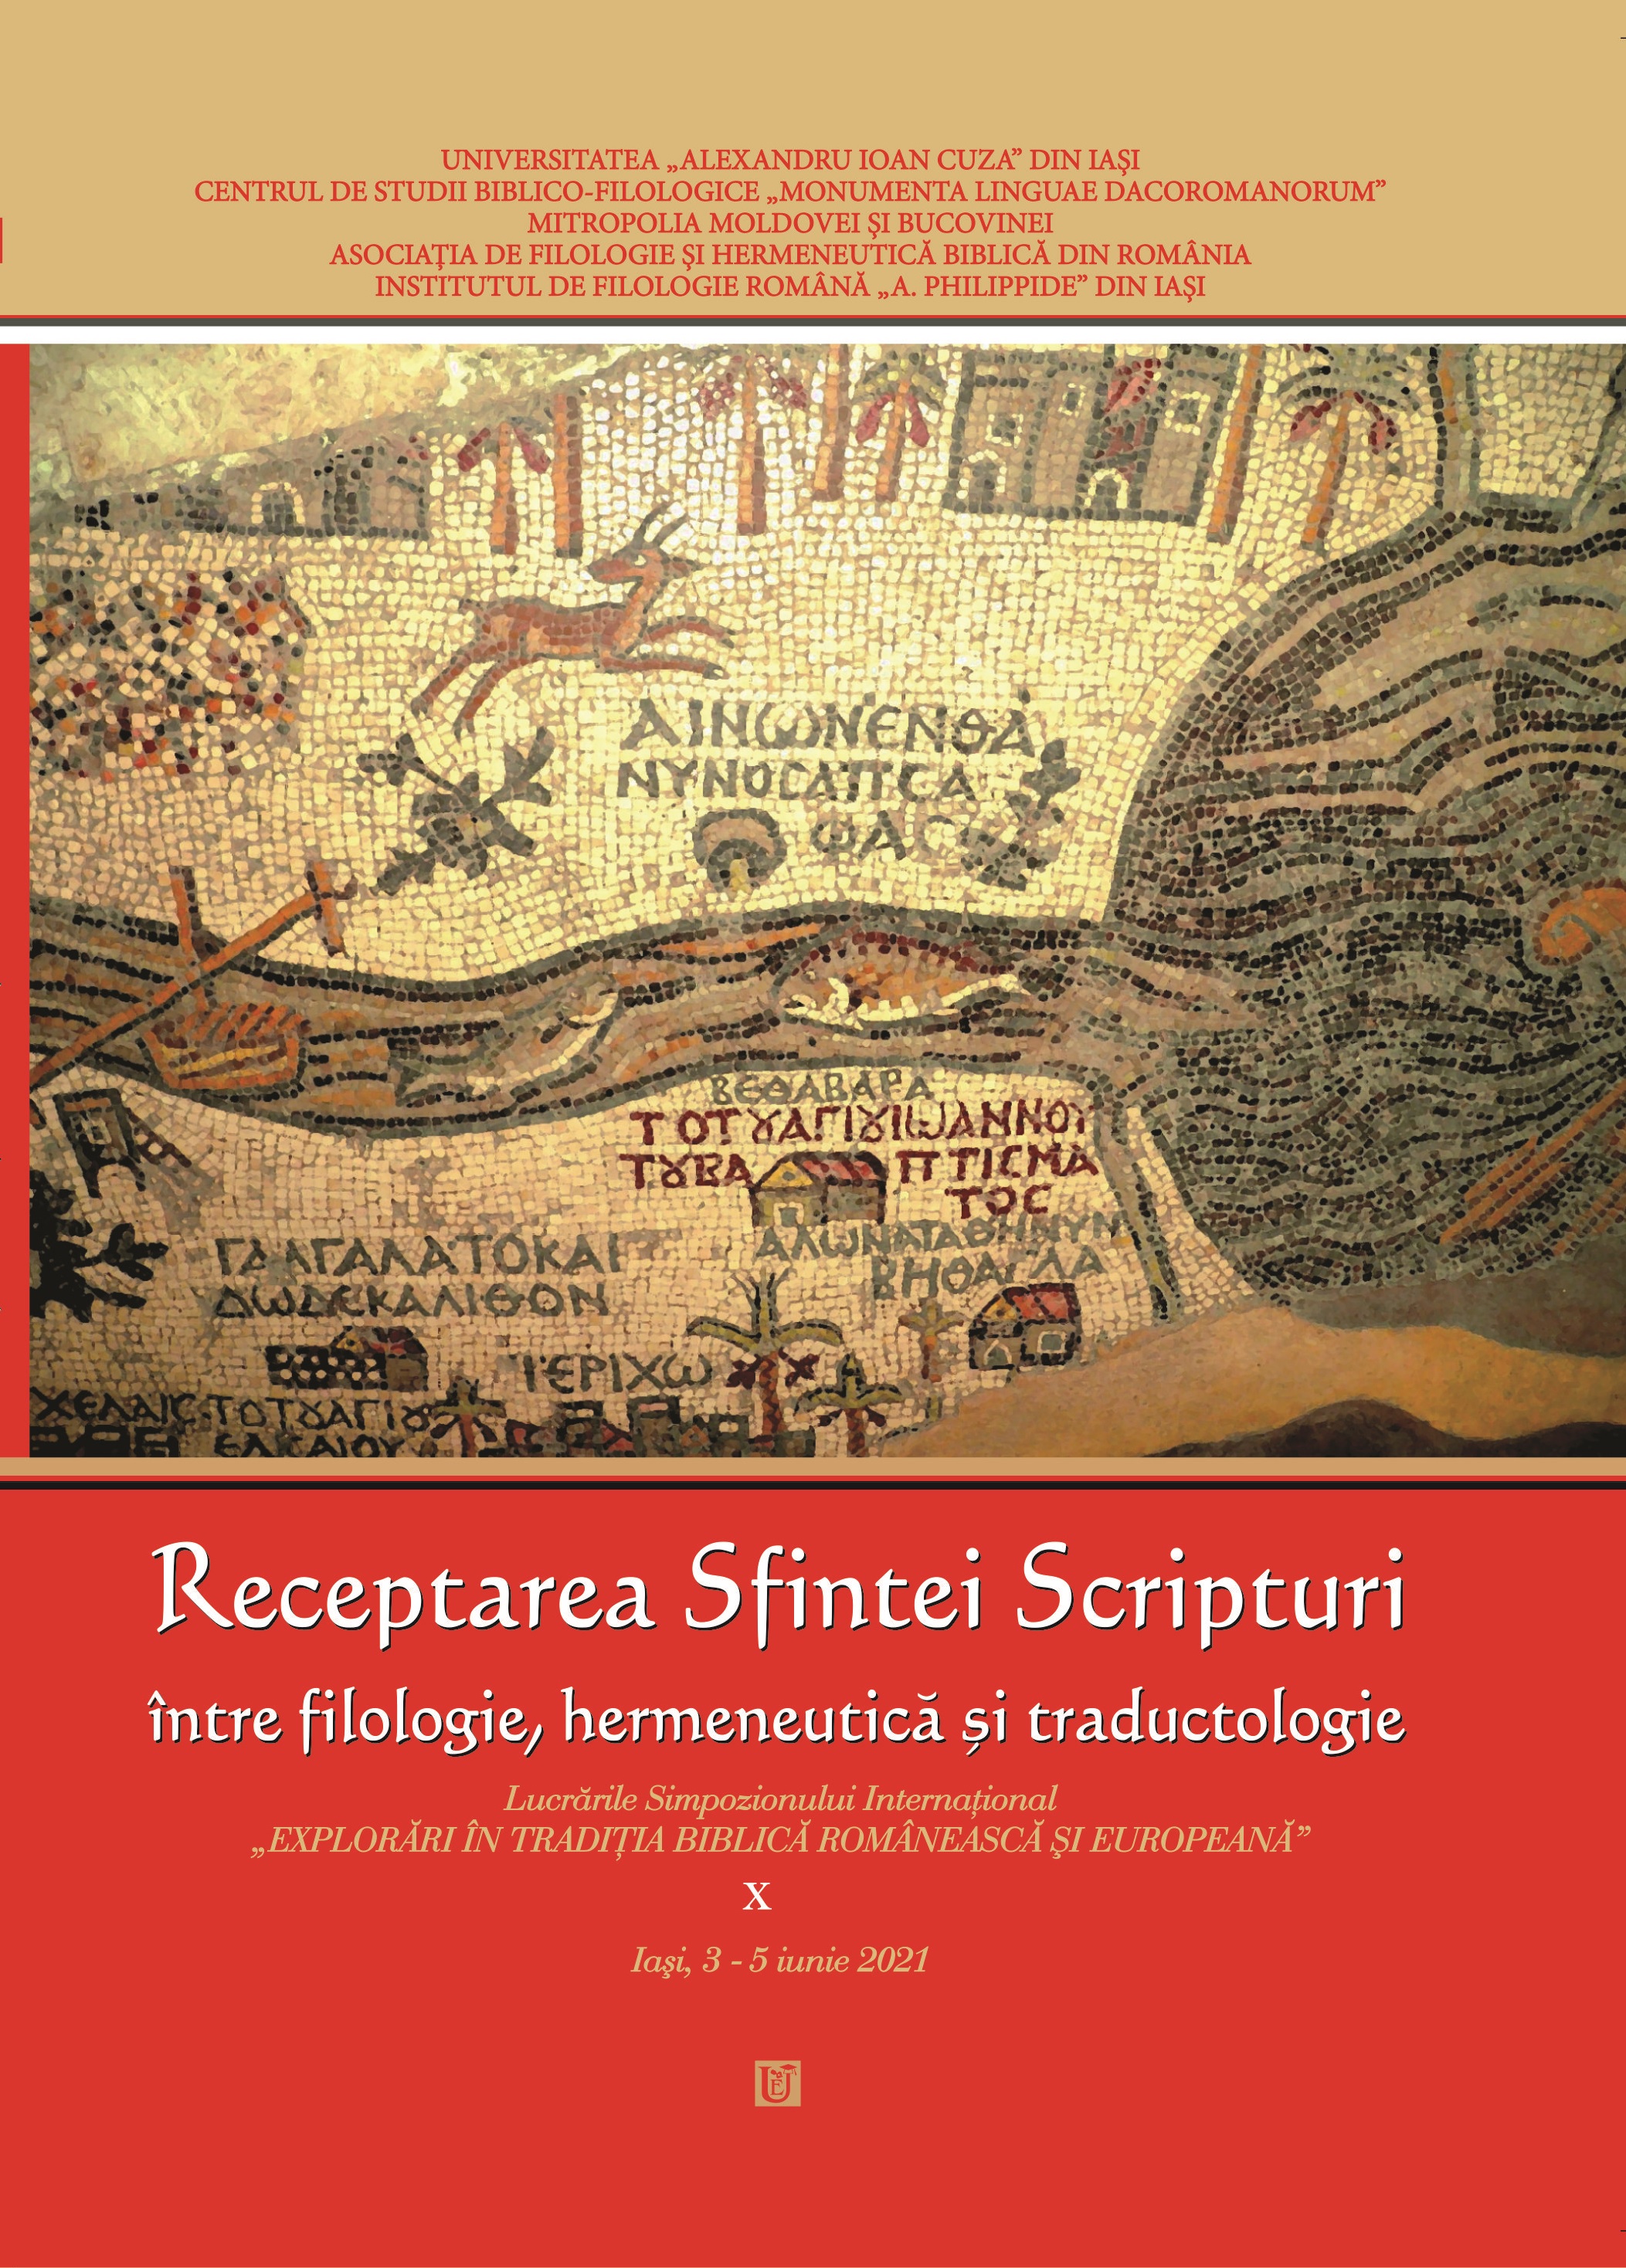 Society of Biblical Literature Commentary on Septuagint of Daniel: The Old Greek and Theodotion Cover Image